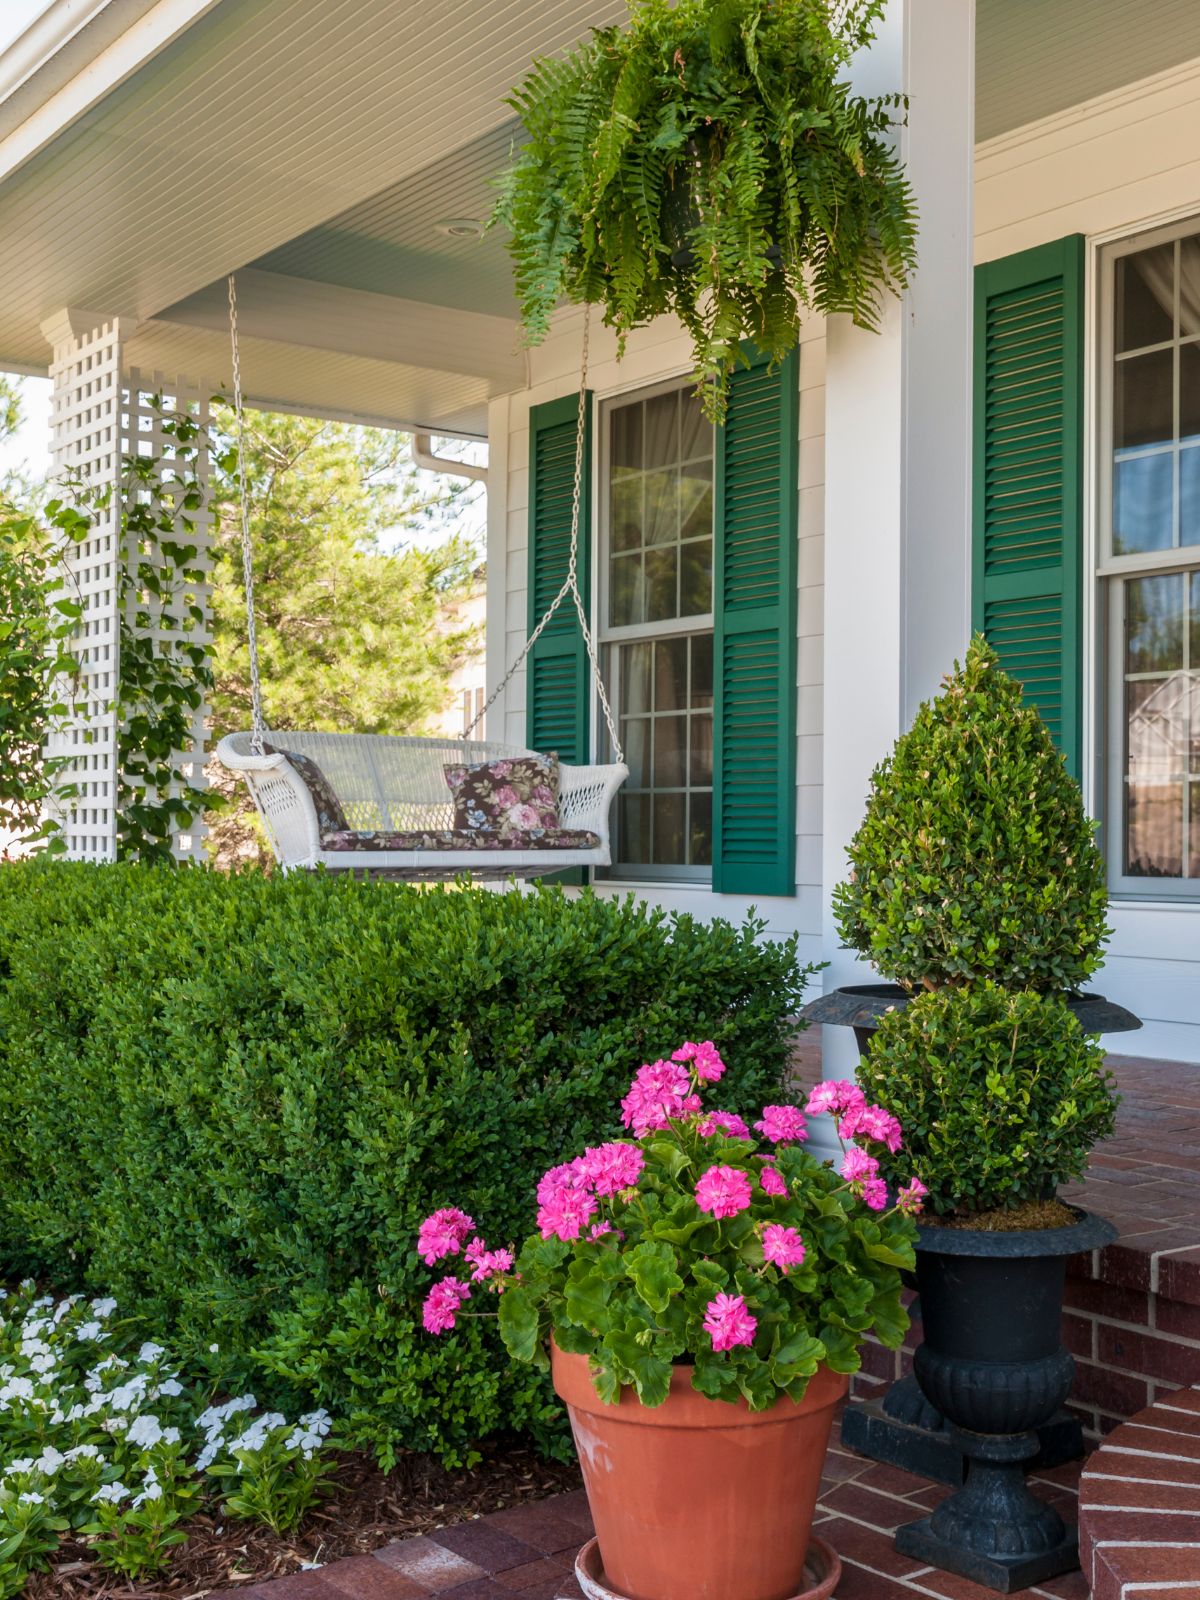 a porch with a swing on it and several low maintenance evergreen plants for pots.